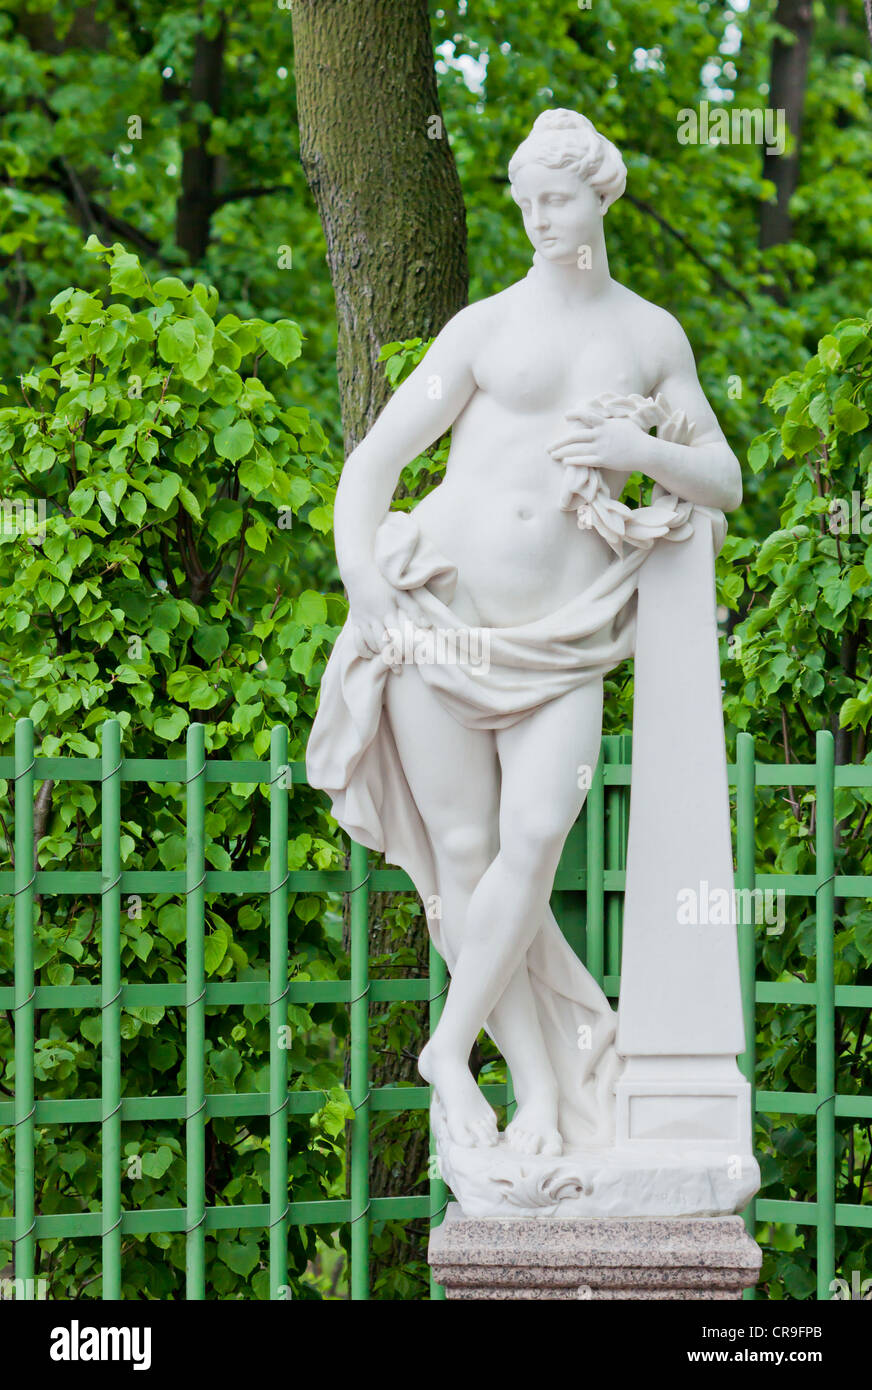 Statue of 'Glory,' the sculptor P. Baratta, Italy, 1718 (copy). Park 'Summer Garden' in St. Petersburg, Russia Stock Photo